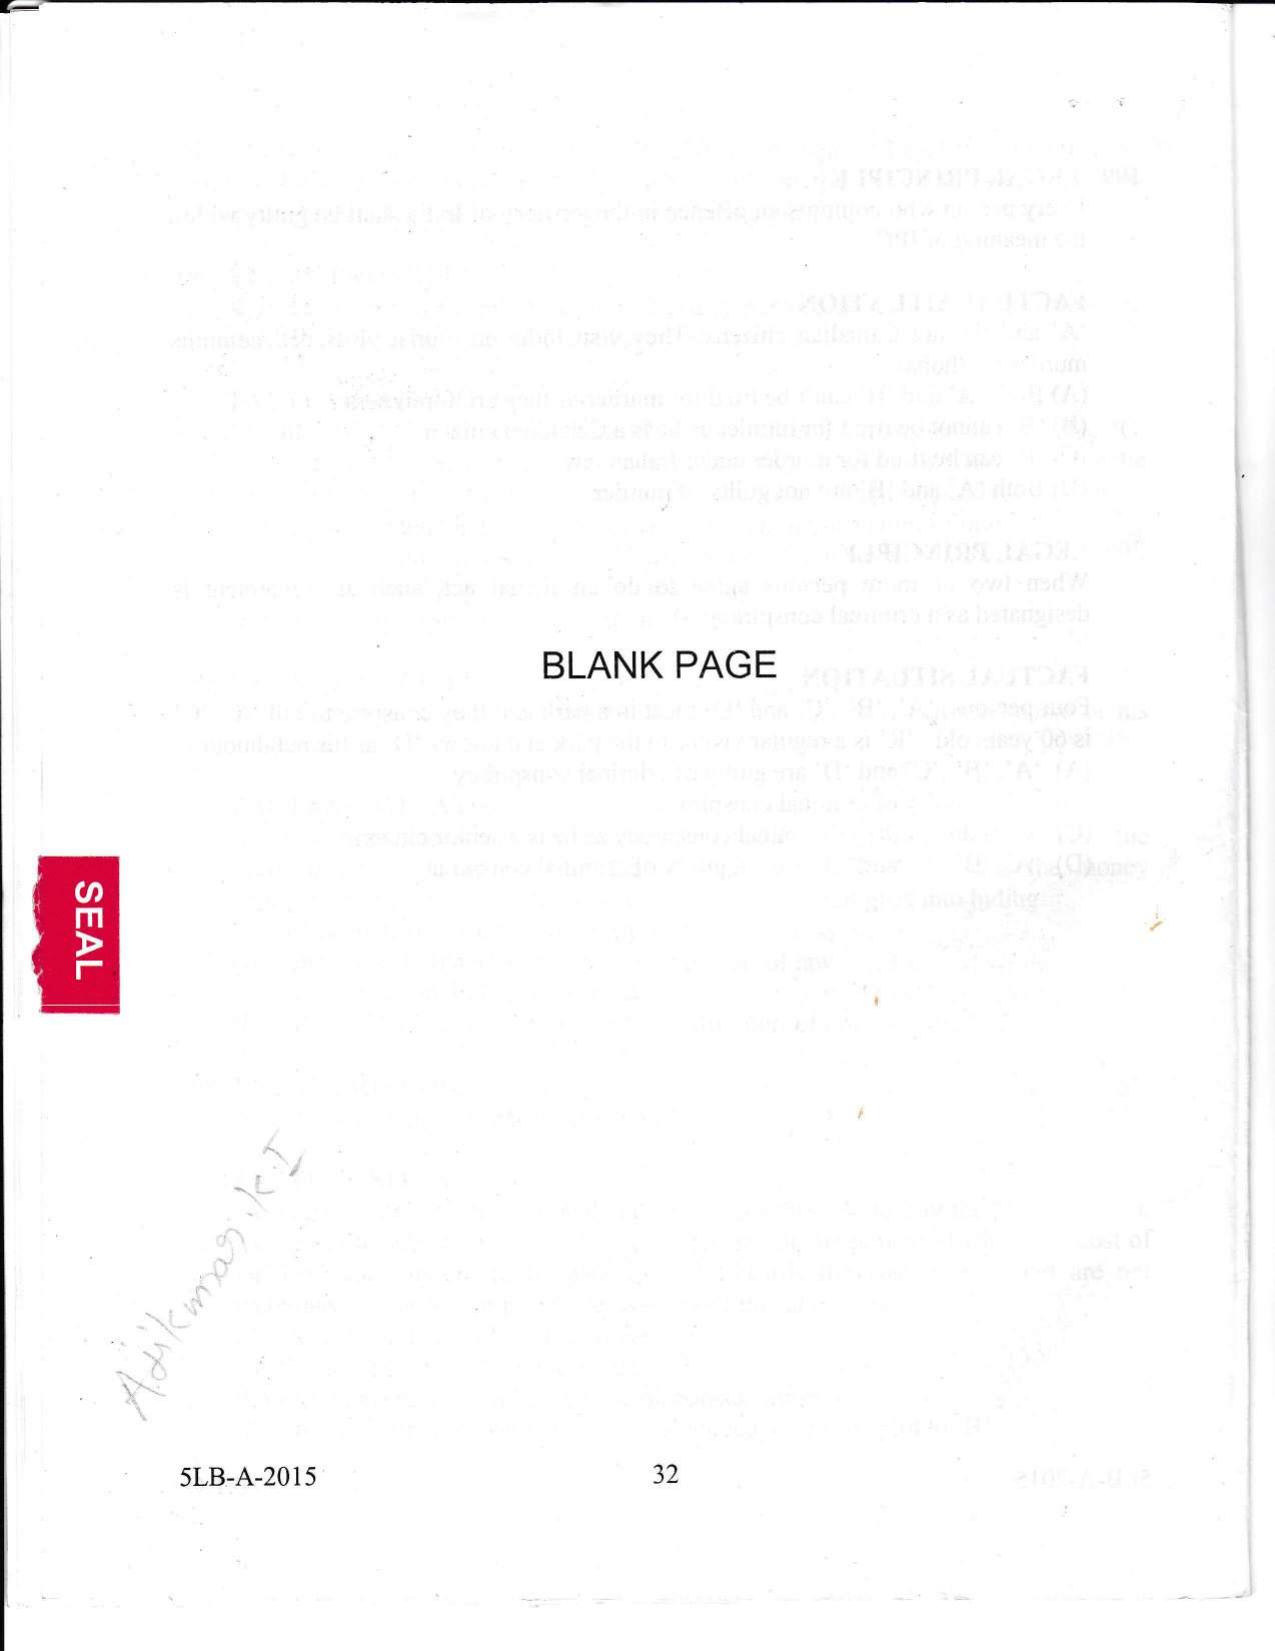 KLEE 5 Year LLB Exam 2015 Question Paper - Page 32